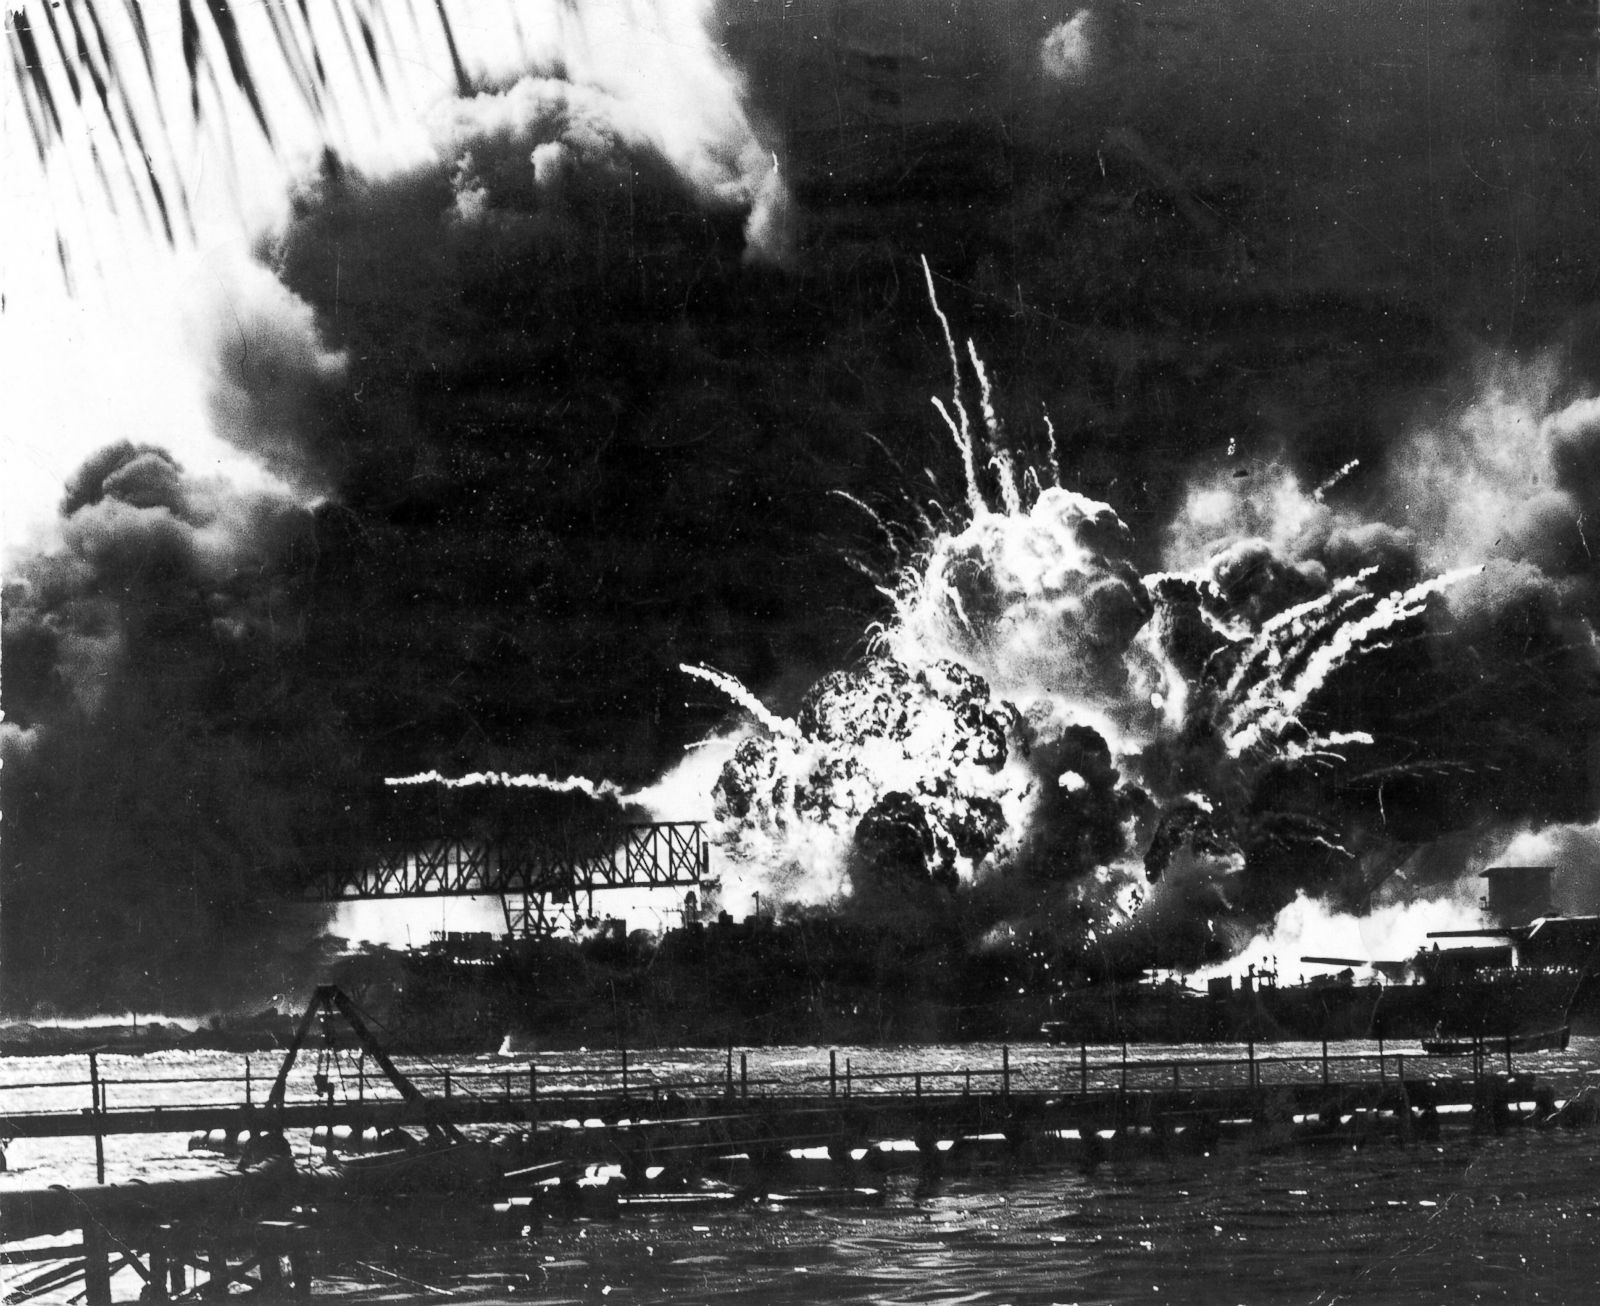 essay on why japan attacked pearl harbor